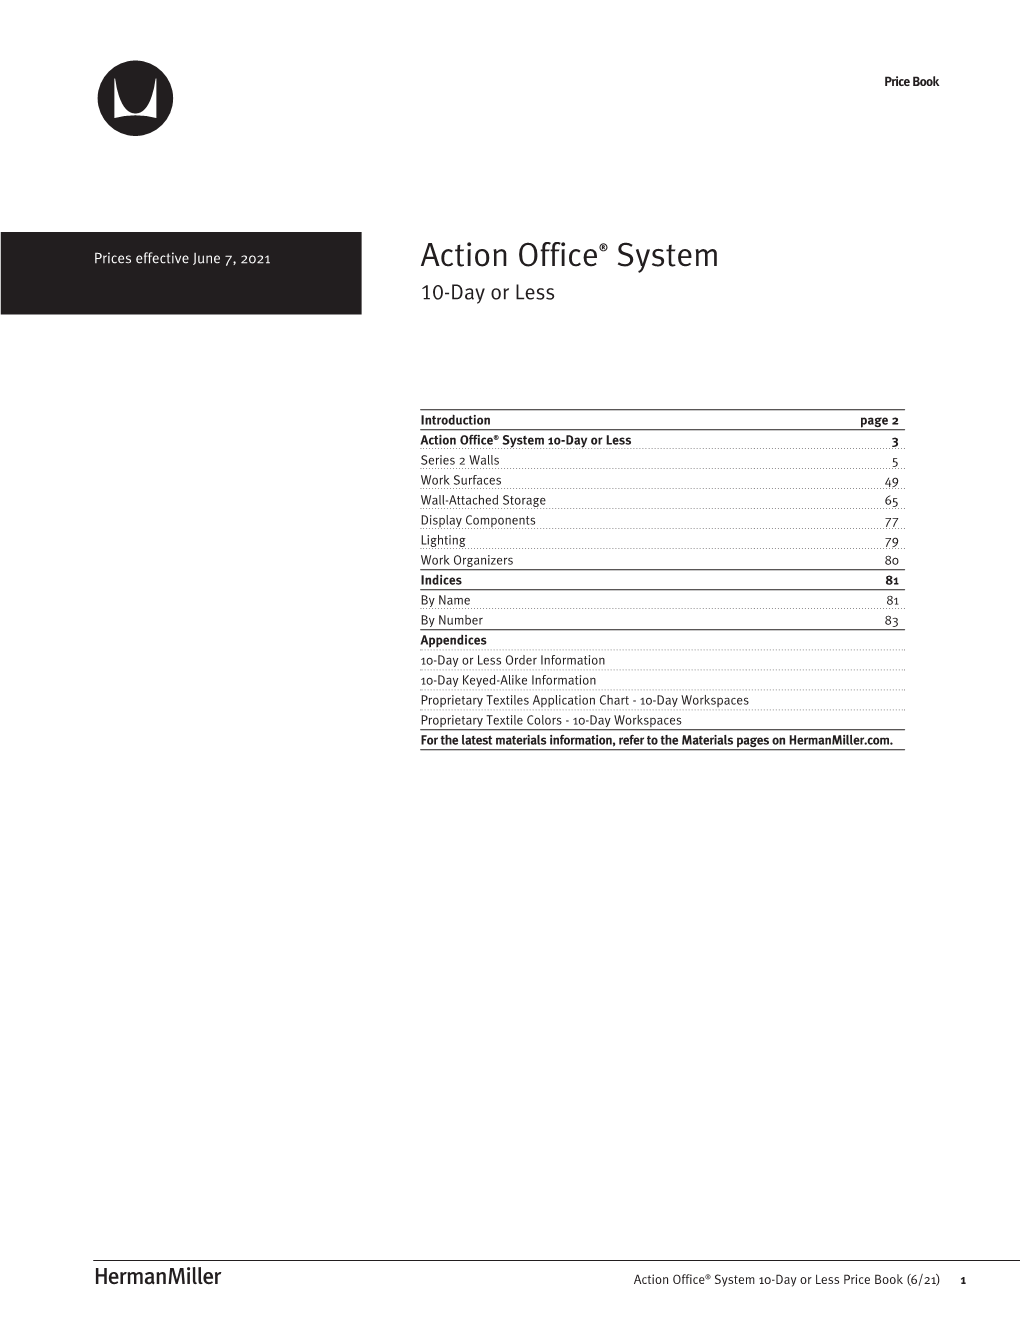 Price Book: Action Office System 10-Day Or Less